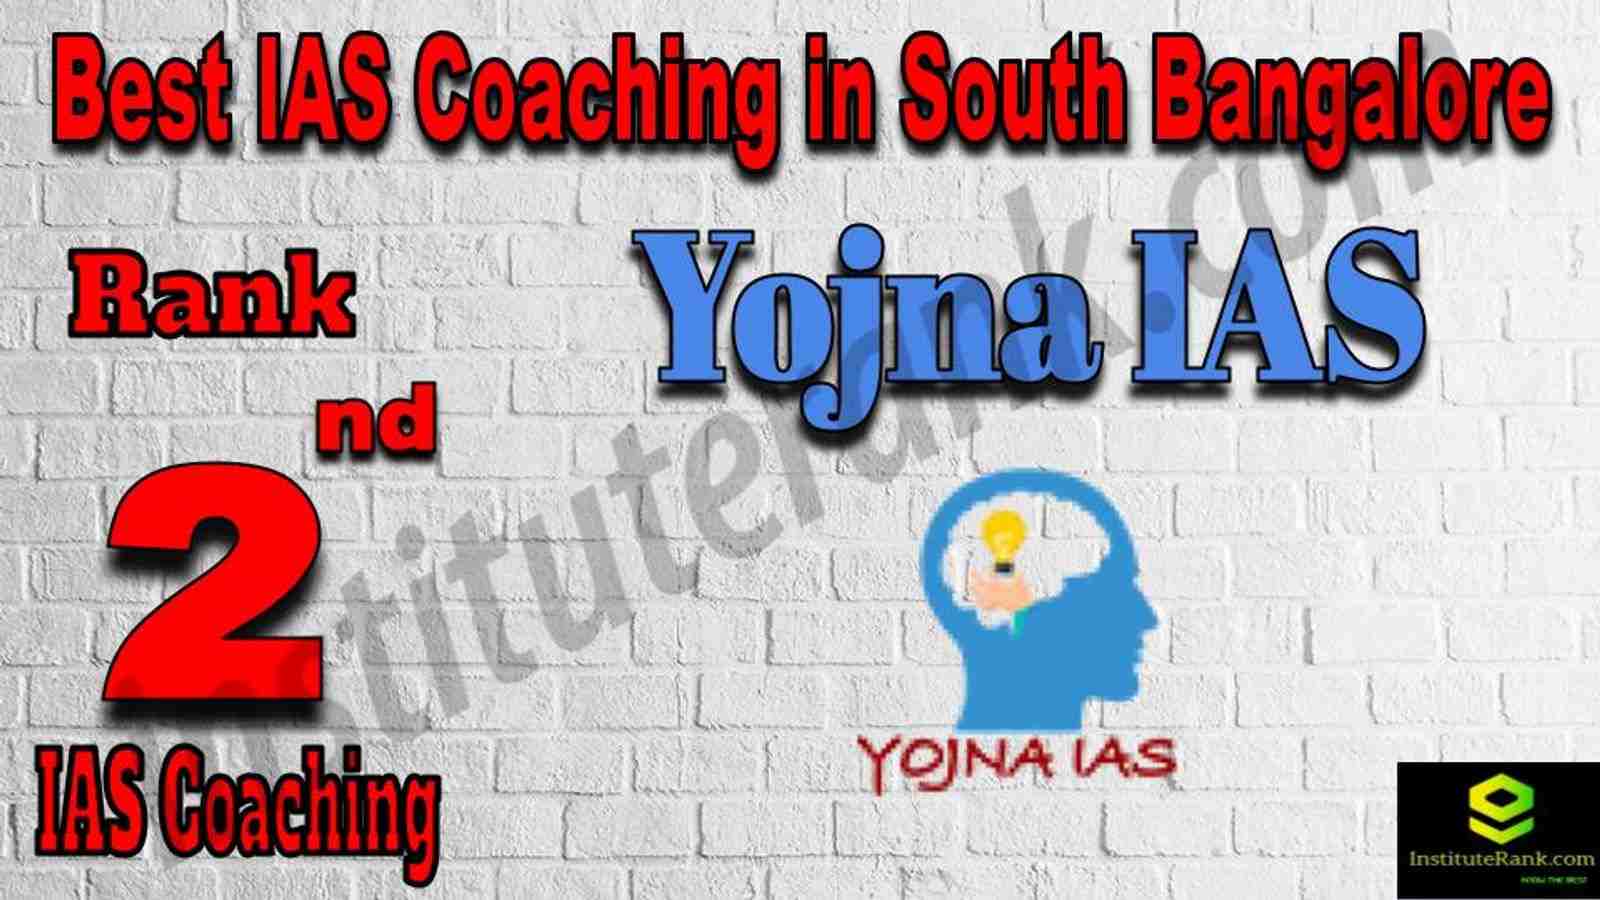 2nd Best IAS Coaching in South Bangalore